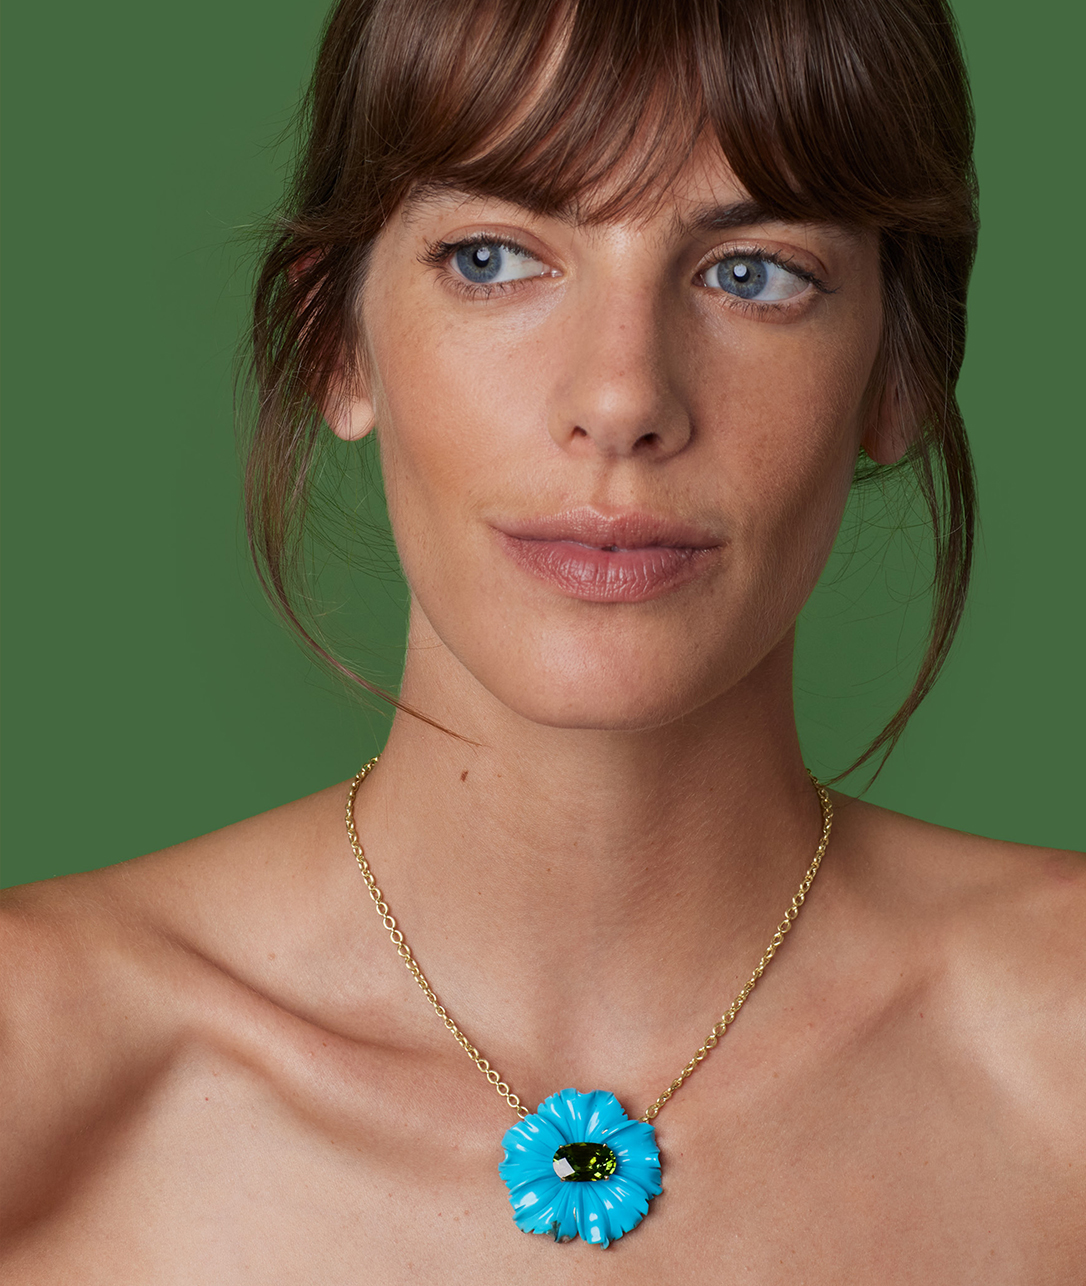 Our One of a Kind Tropical Flower Necklaces are always swoon-worthy.SHOP TROPICAL FLOWER